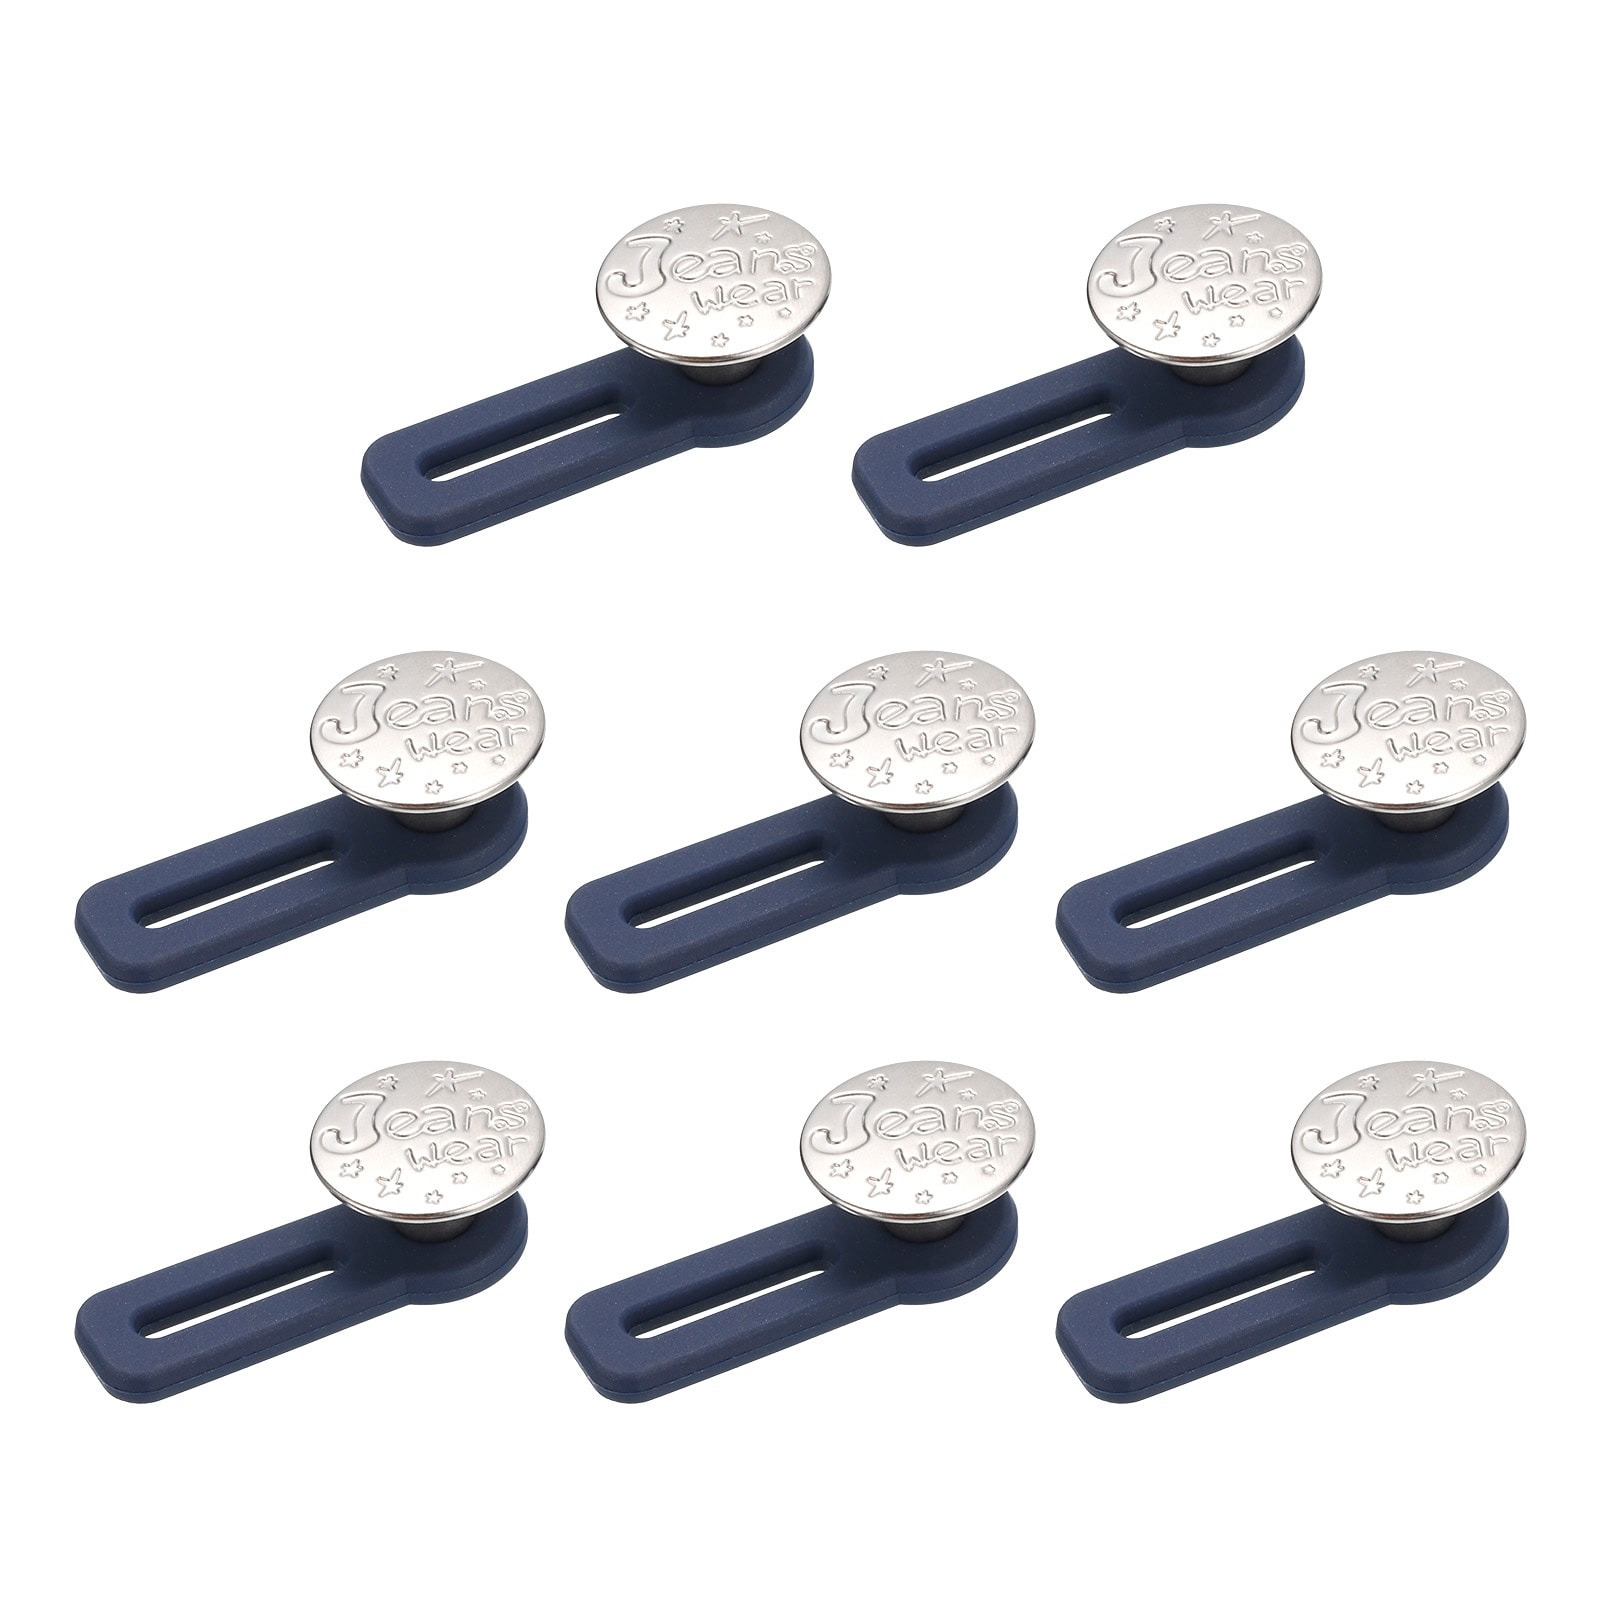 Button Extenders, 8pcs - Silicone Button Extenders for Jeans(Silver,1.38)  - Silver - Bed Bath & Beyond - 37559179